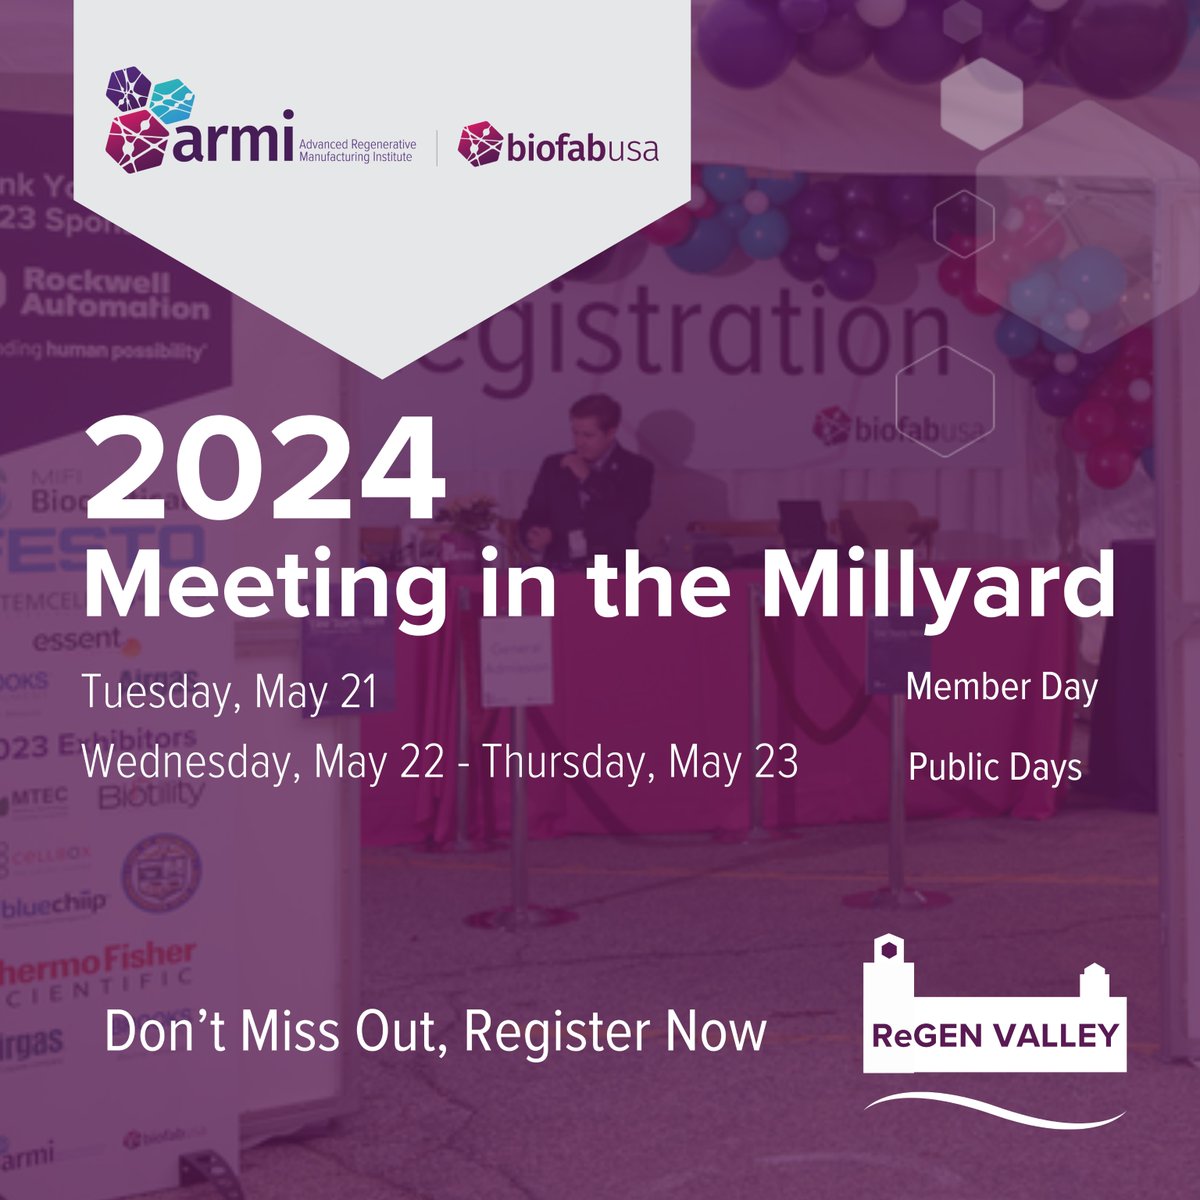 Experience the future of biofabrication at MITM24! Join #ARMIBioFabUSA in ReGEN VALLEY for an unforgettable event shaping the industry's trajectory. Don't miss out – register now! ow.ly/35zk50QPJZW